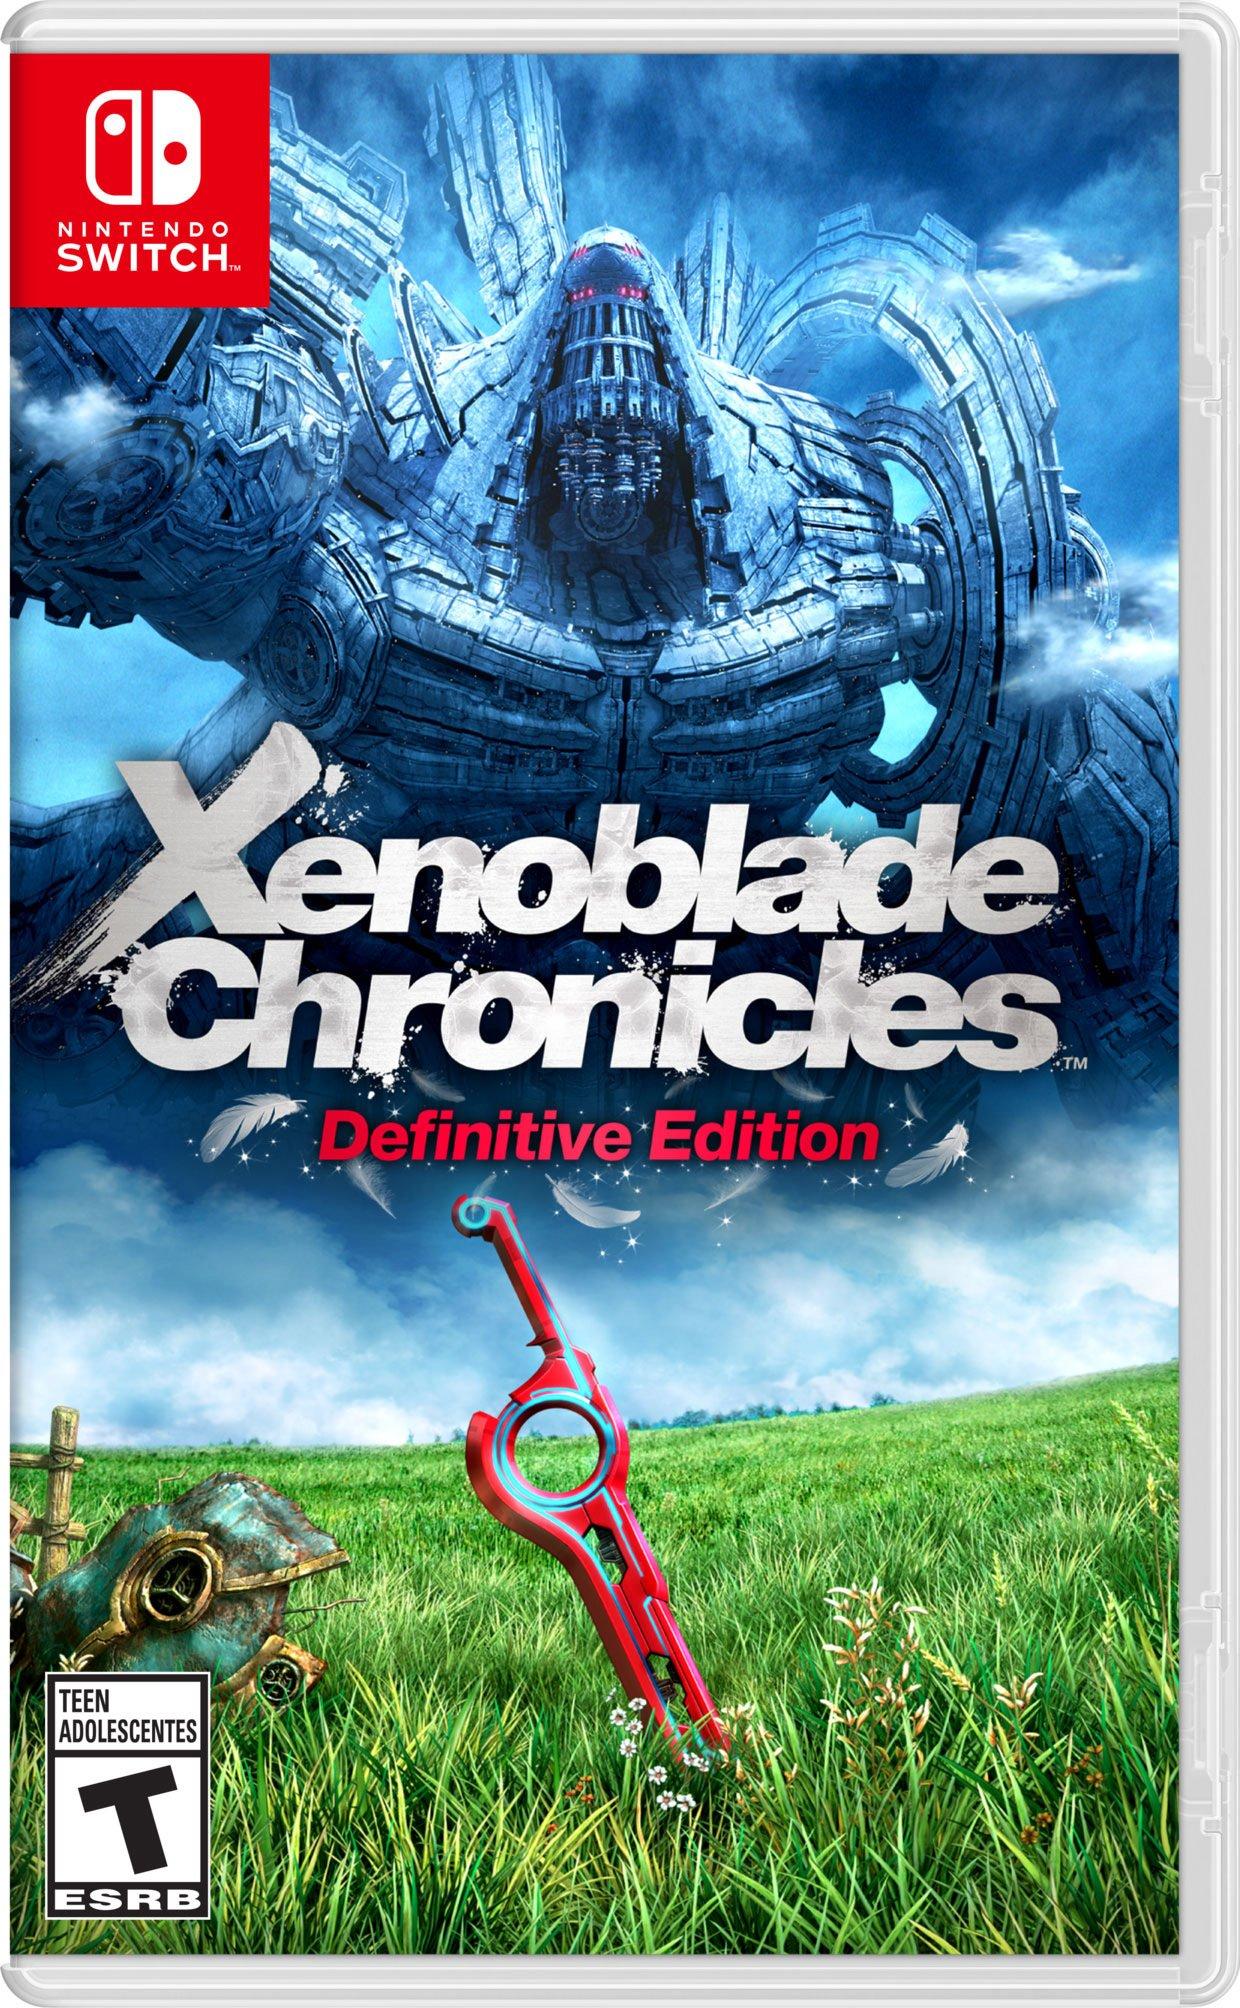 xenoblade chronicles definitive edition switch release date